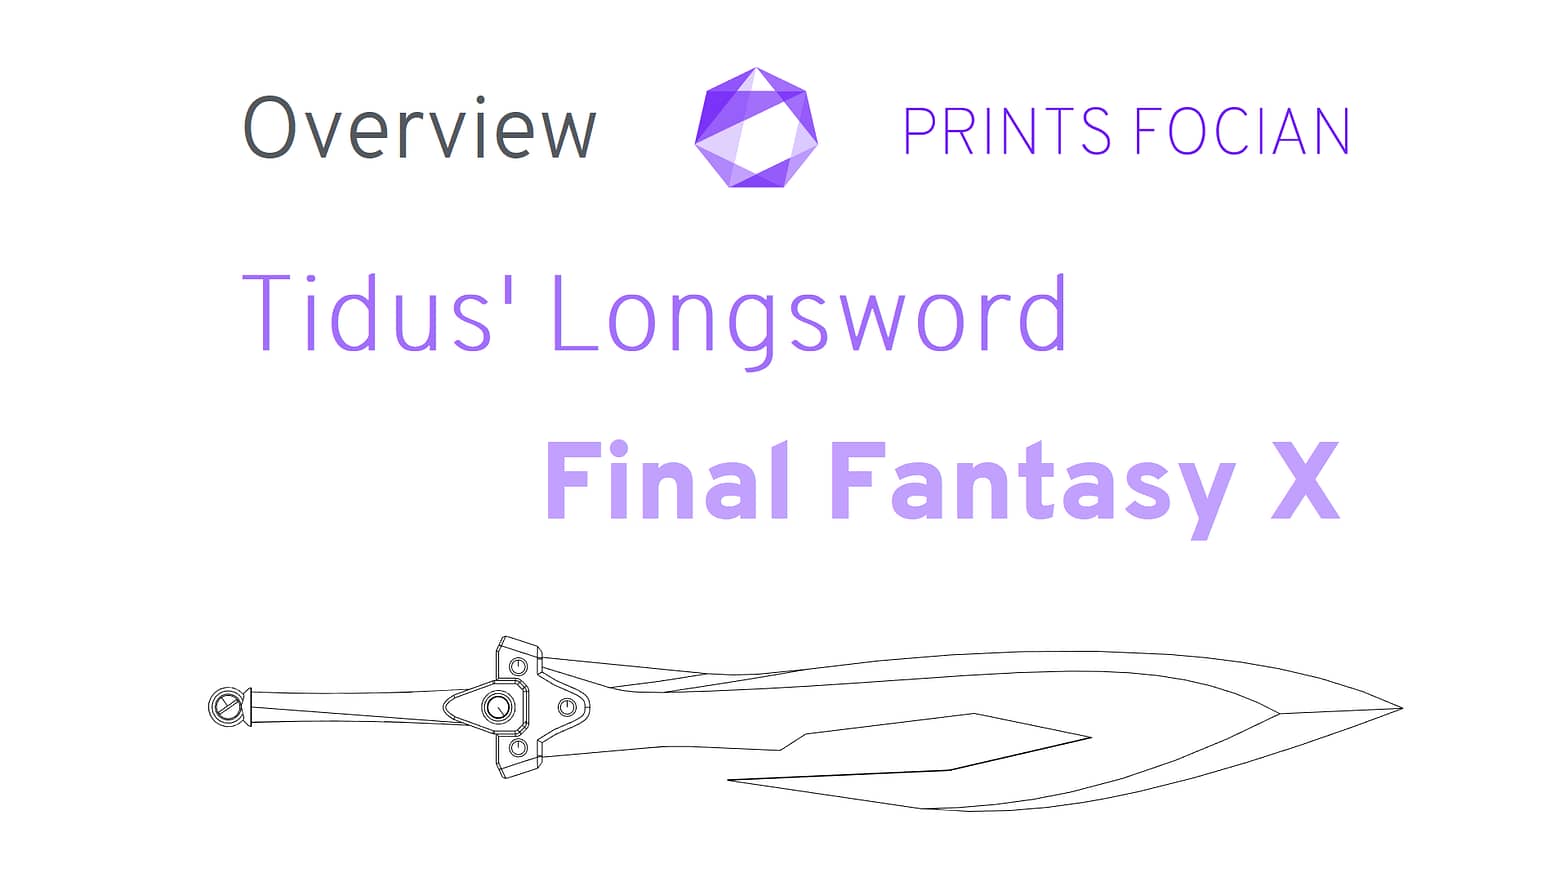 Wireframe image of the Tidus' Longsword on a white background. Prints Focian Icon top and central. Text: Purple Prints Focian, Tidus' Longsword, FInal Fantasy X and dark grey Overview